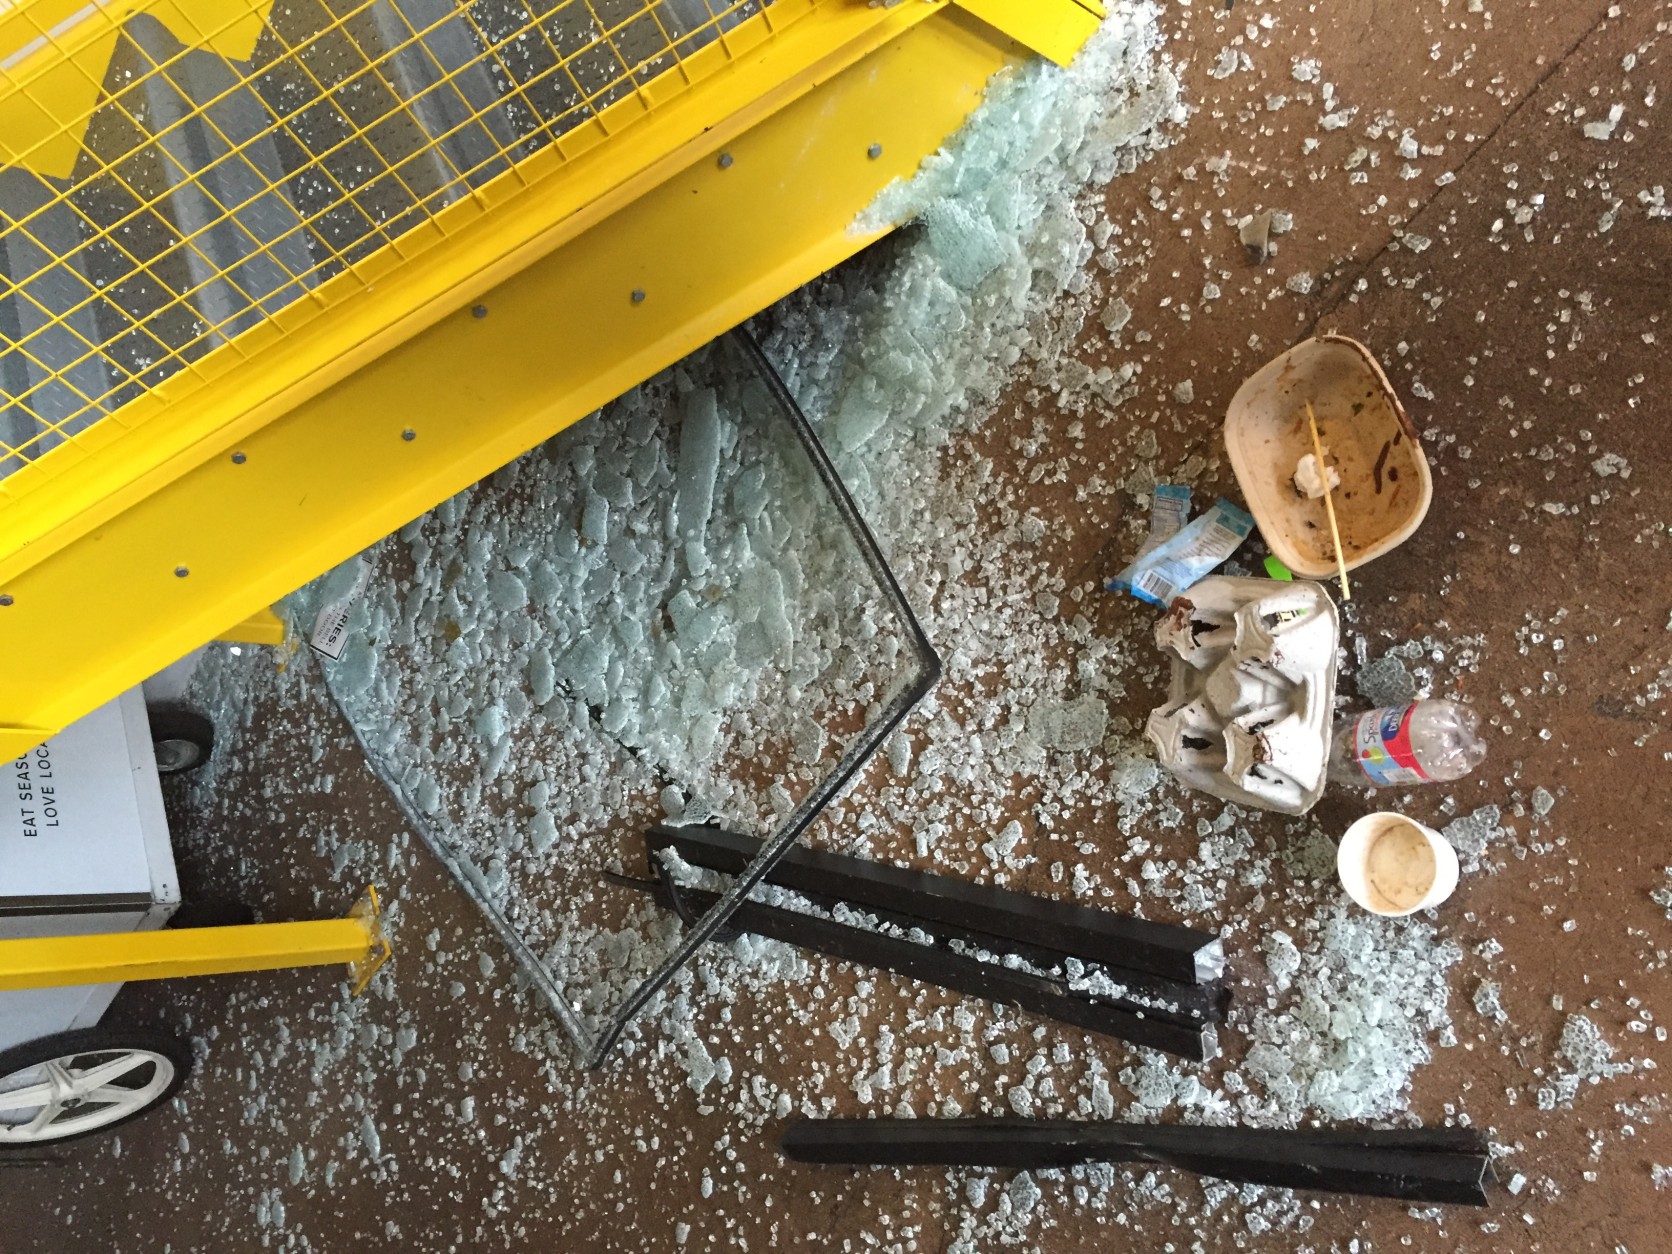 Debris is seen inside the Dolcezza Gelato Factory & Coffee Lab at Union Market after a crash on Jan. 9, 2016. (Courtesy NBC Washington)